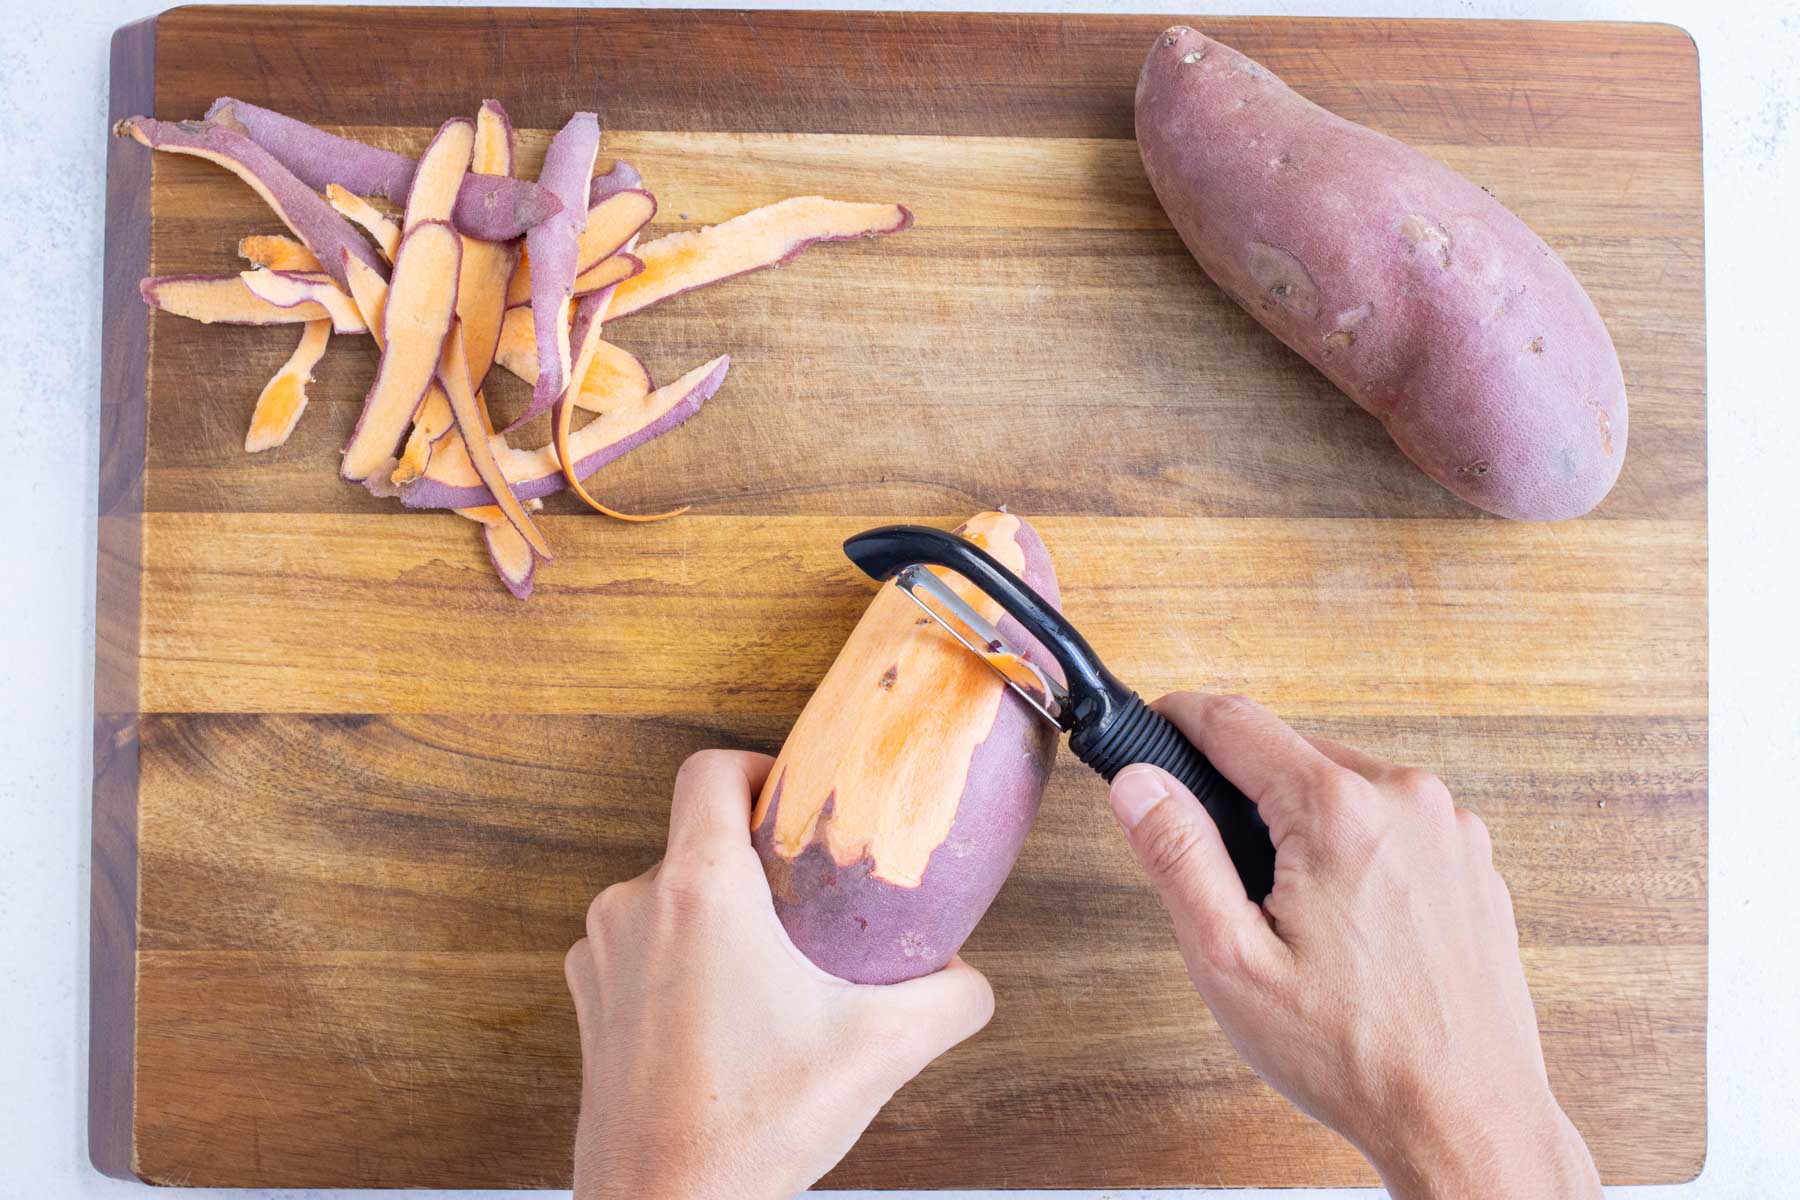 A vegetable peeler removes the skin from a sweet potato.